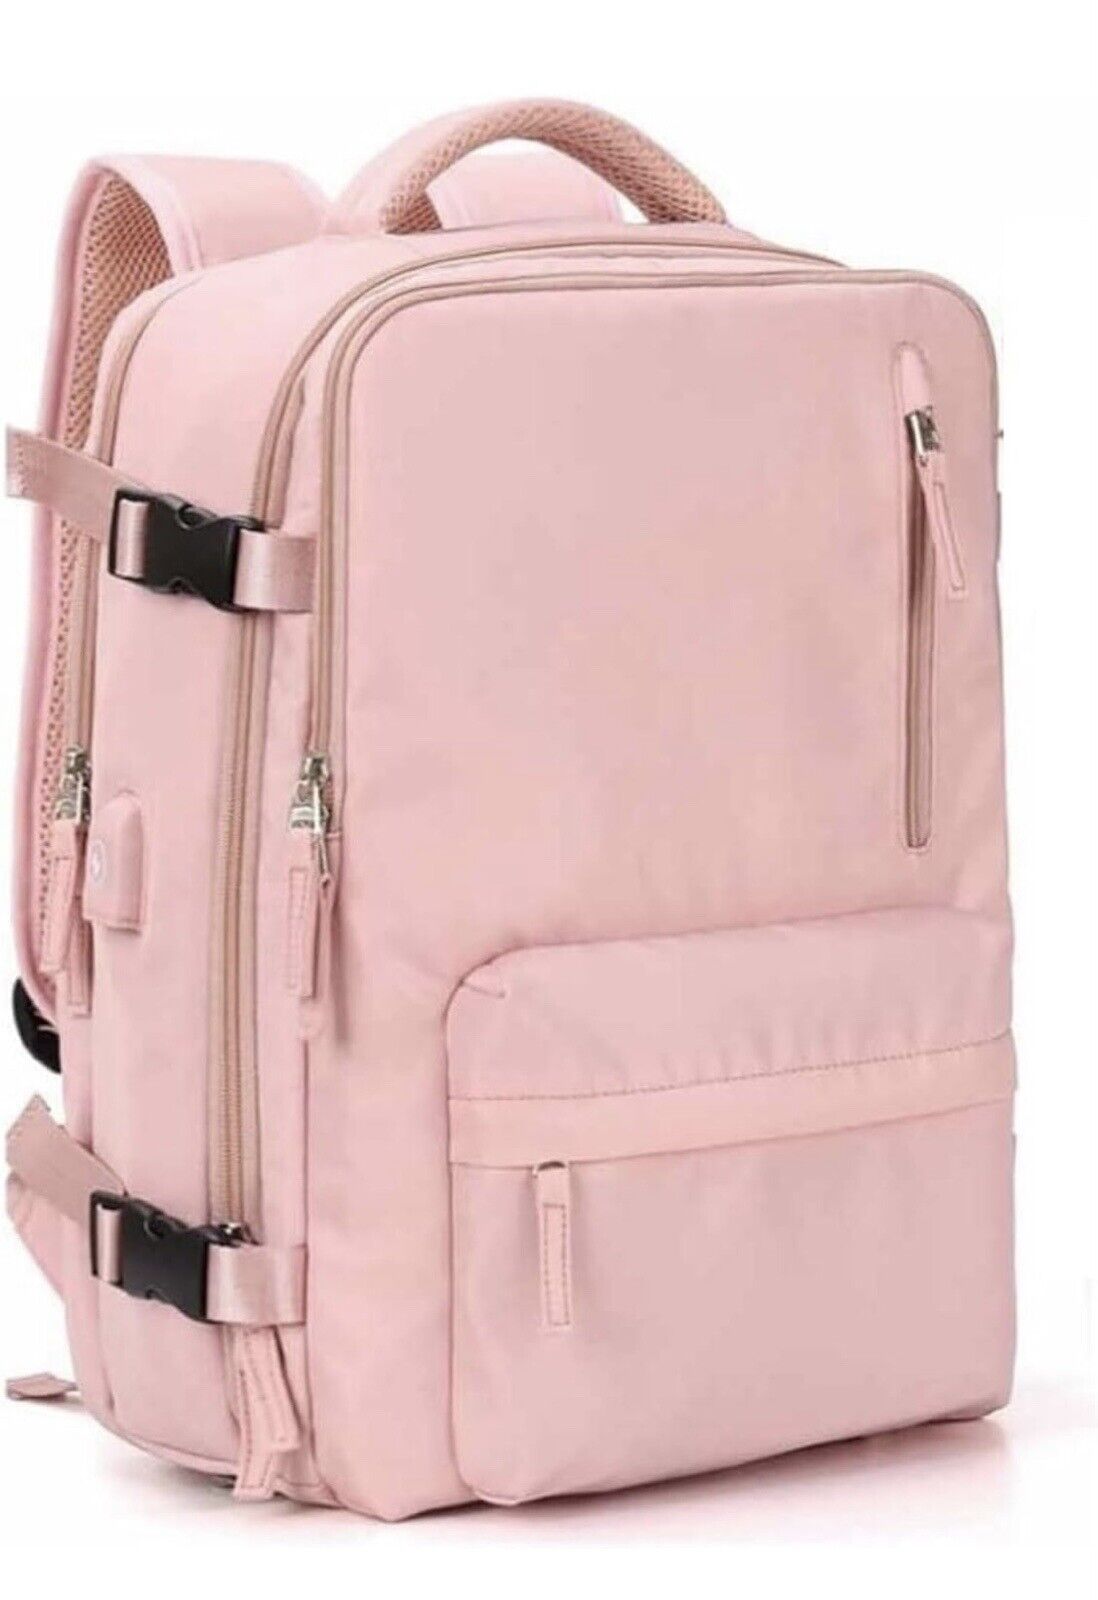 Large Travel Laptop Backpack Expandable 45L Carry On Backpack Water Resistnant